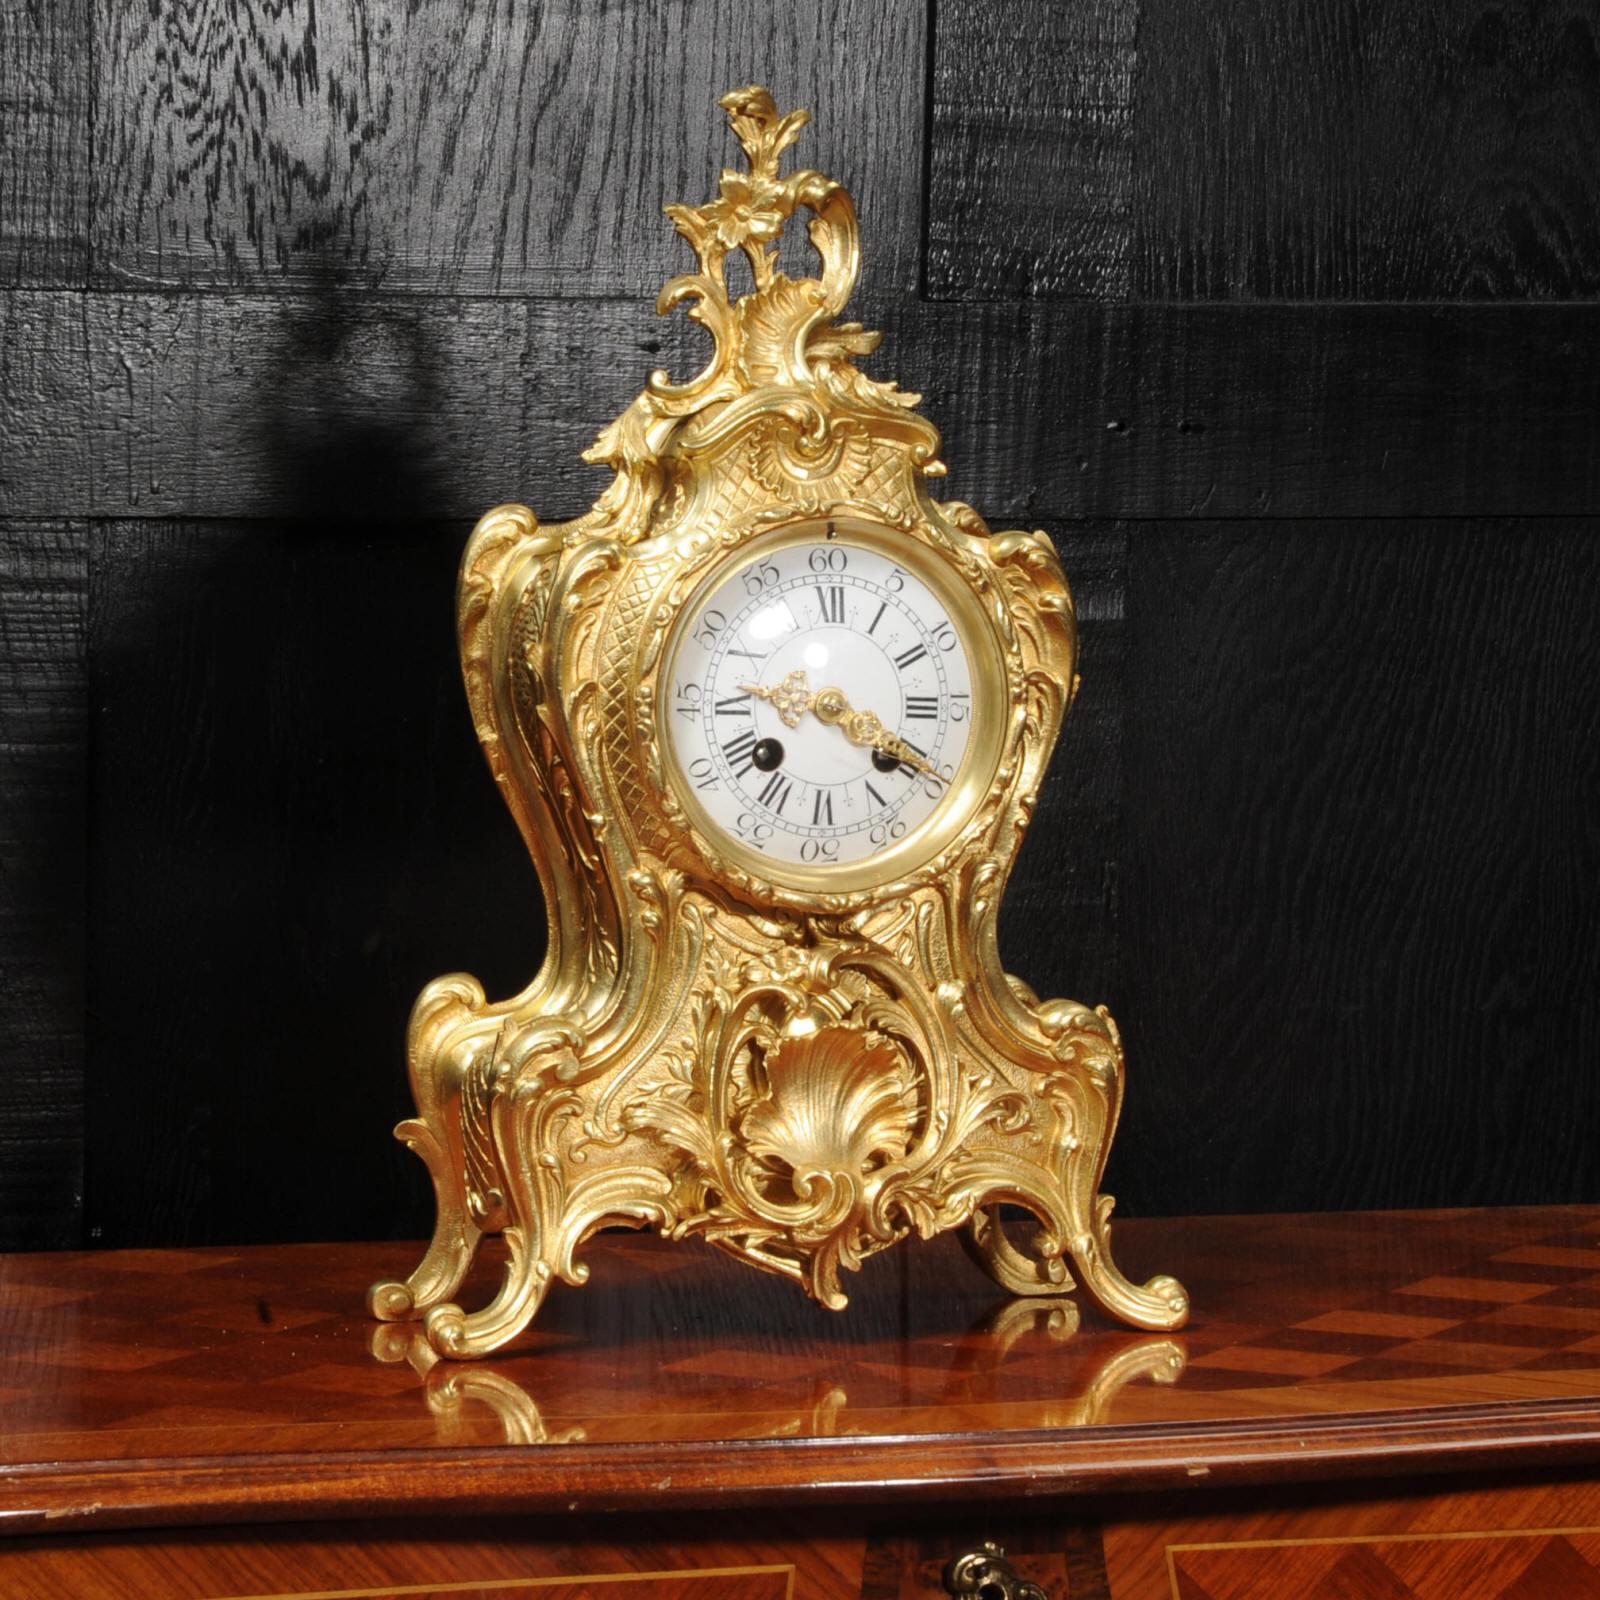 A lovely antique French clock by A. D. Mougin, circa 1900. It is boldly modelled in the Rococo style in gilded bronze. Waisted keyhole shape profusely decorated with 'C' scrolls, and acanthus to the shoulders. A large shell motif is mounted to the